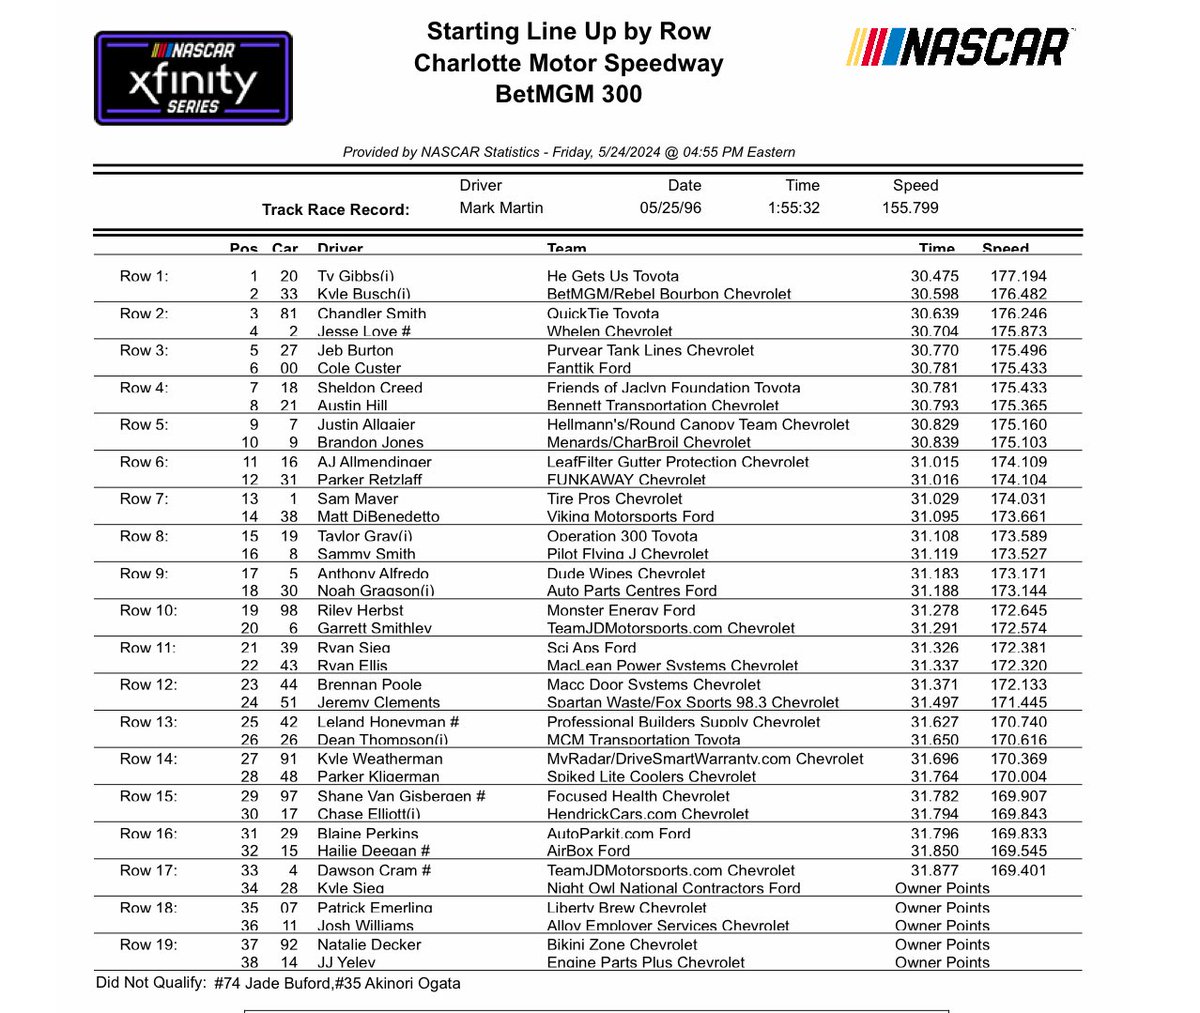 Xfinity lineup for Saturday at Charlotte.